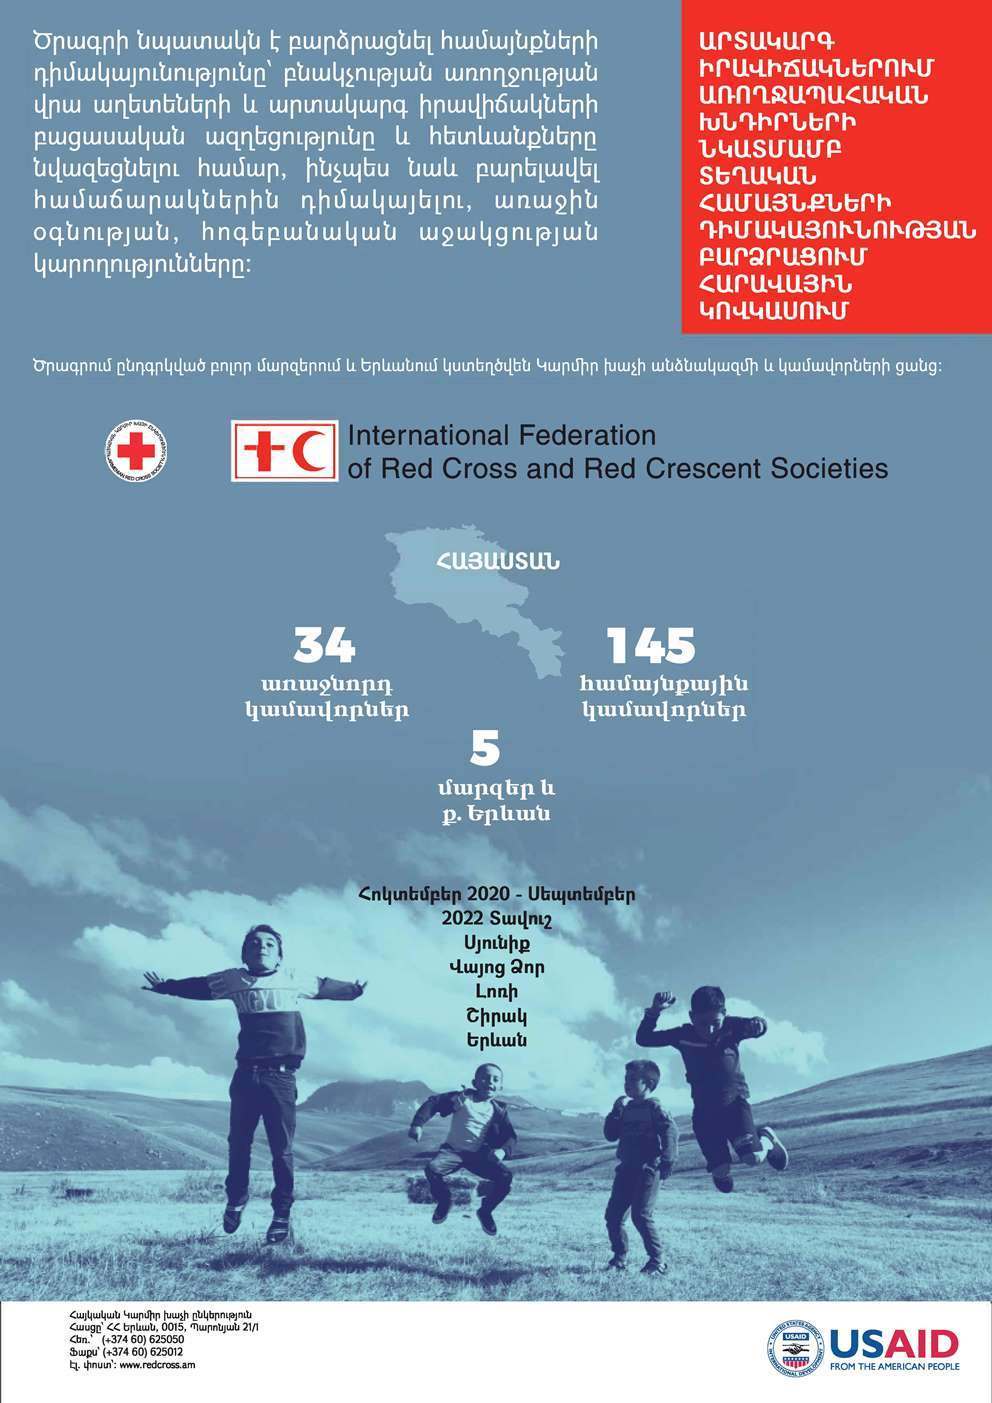 STRENGTHENING RESILIENCE OF SOUTH CAUCASUS COMMUNITIES TO HEALTH EMERGENCIES